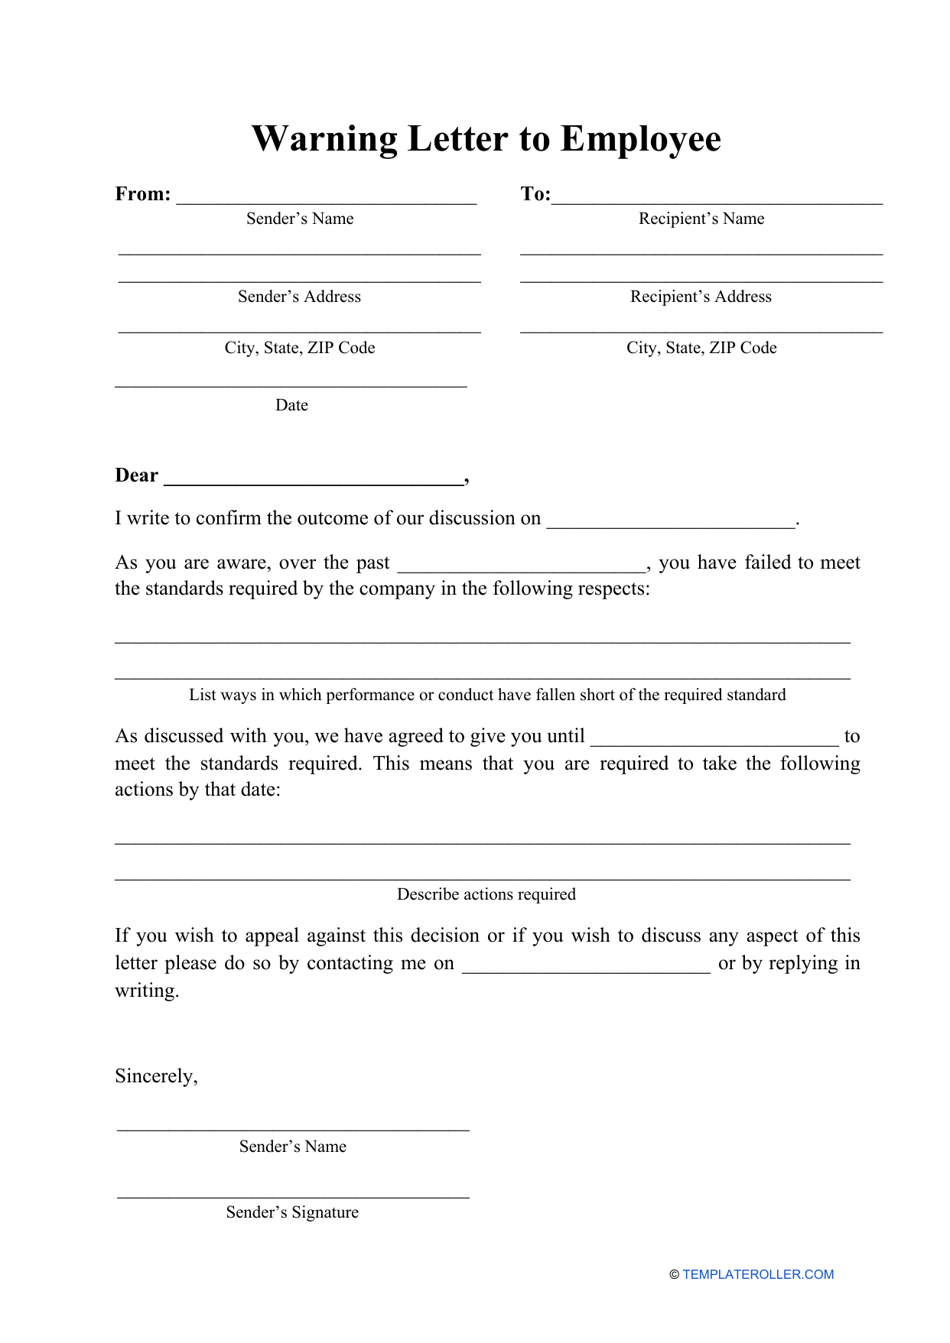 Warning Letter To Employee Template For Your Needs Letter Template - Vrogue